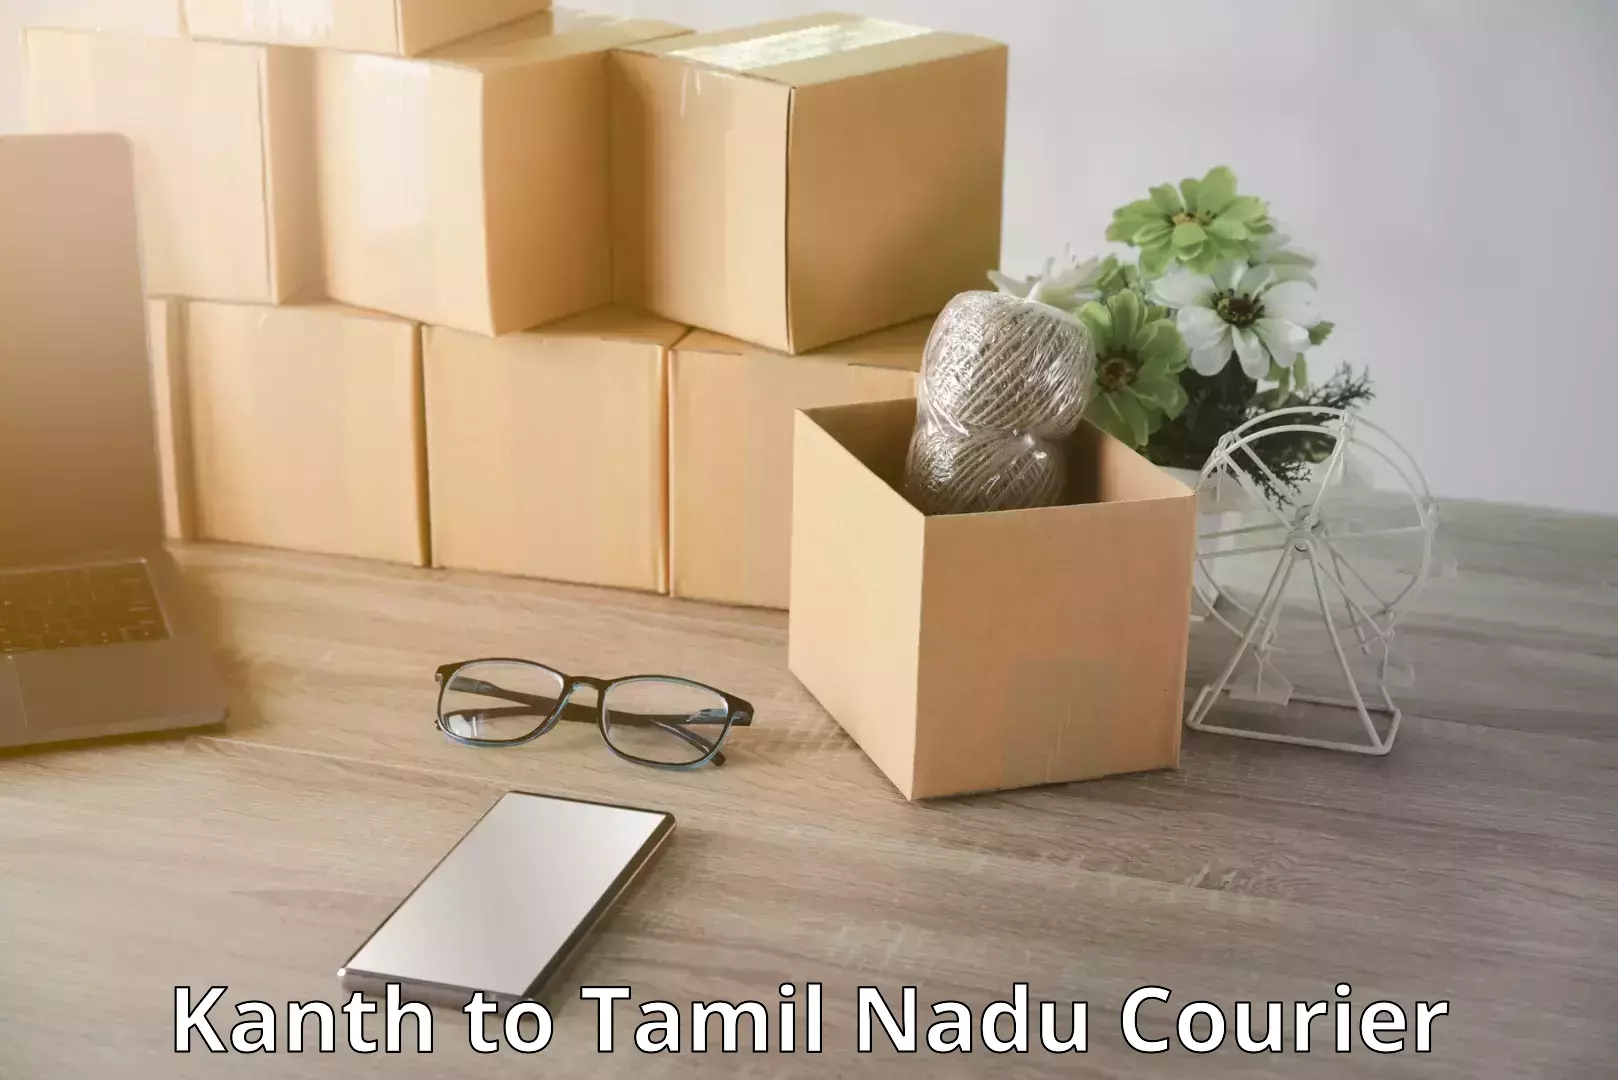 Automated luggage transport Kanth to Tamil Nadu